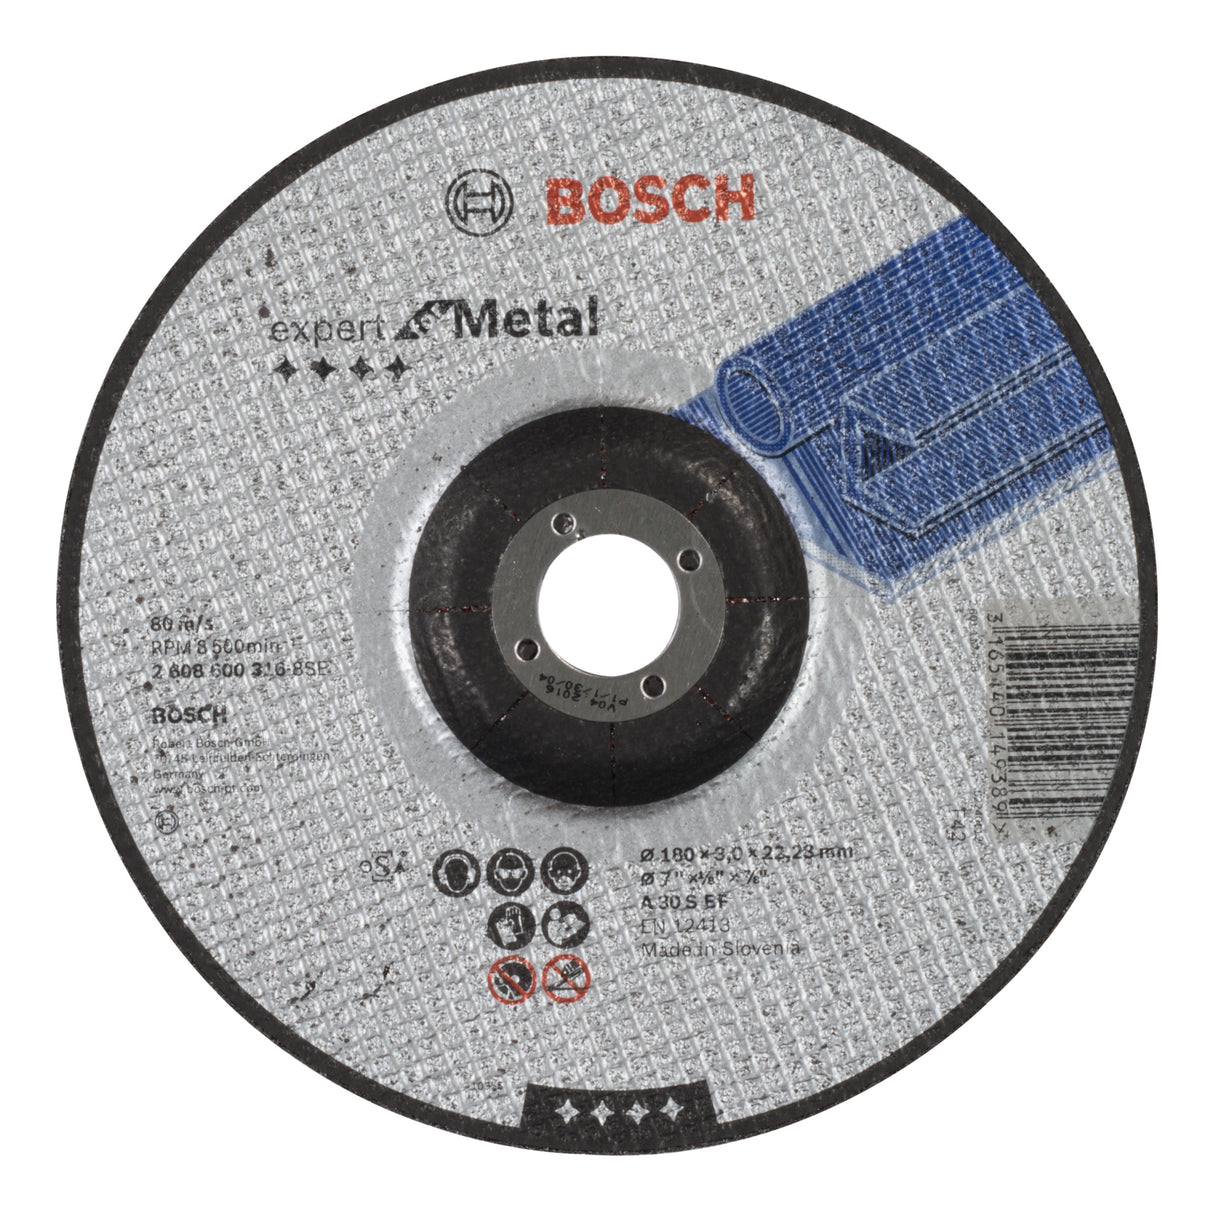 Bosch Professional Metal Cutting Disc with Depressed Centre A 30 S BF - 180mm x 3.0mm